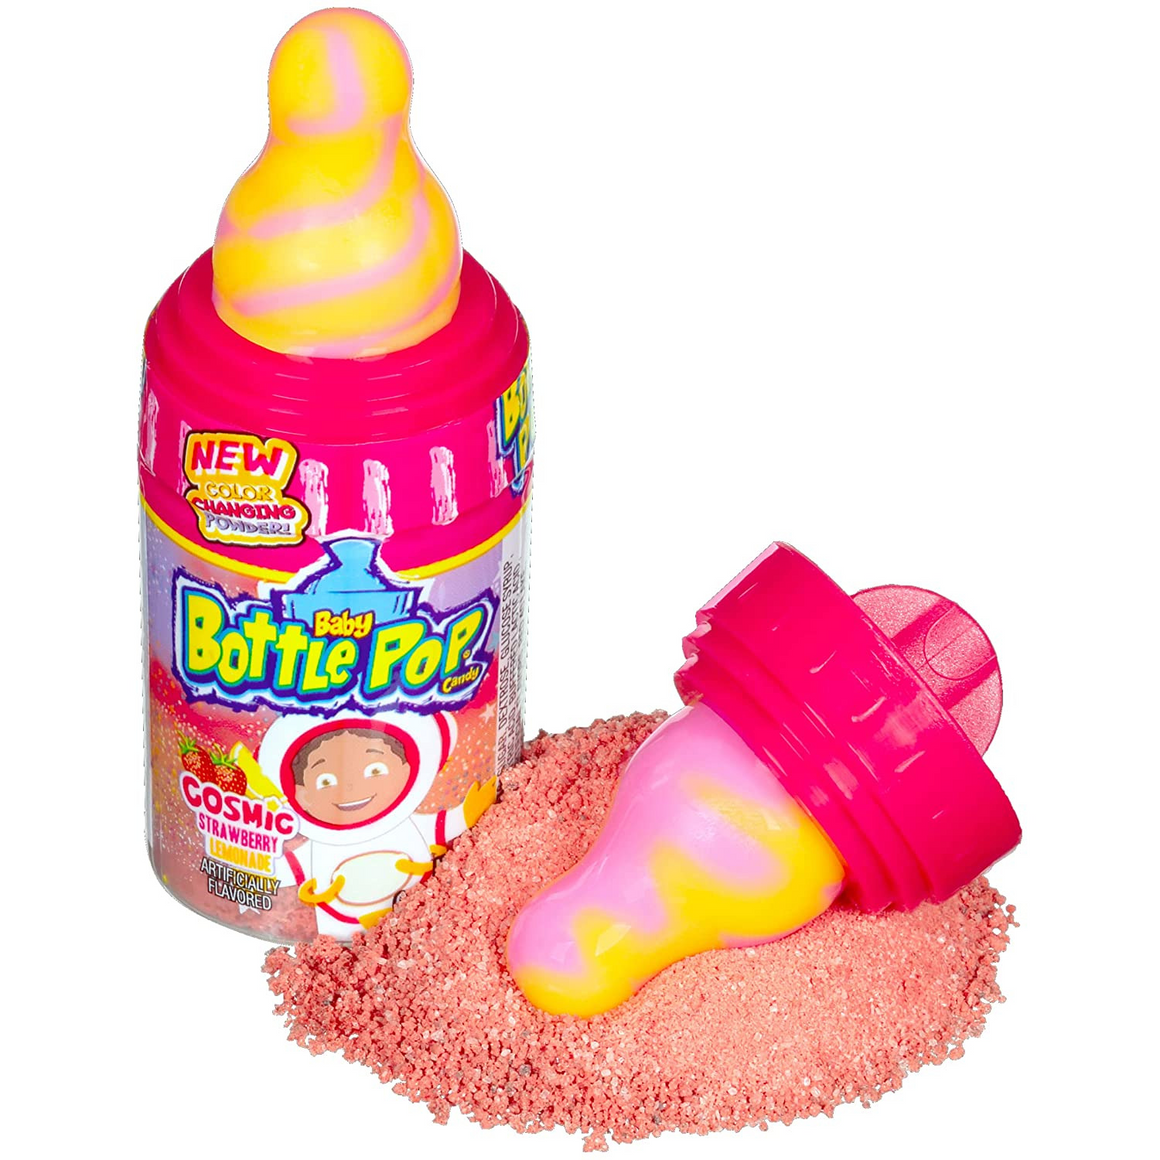 All City Candy Baby Bottle Pops Candy 1.1 oz. - Case of 18 Novelty Bazooka Candy Brands For fresh candy and great service, visit www.allcitycandy.com